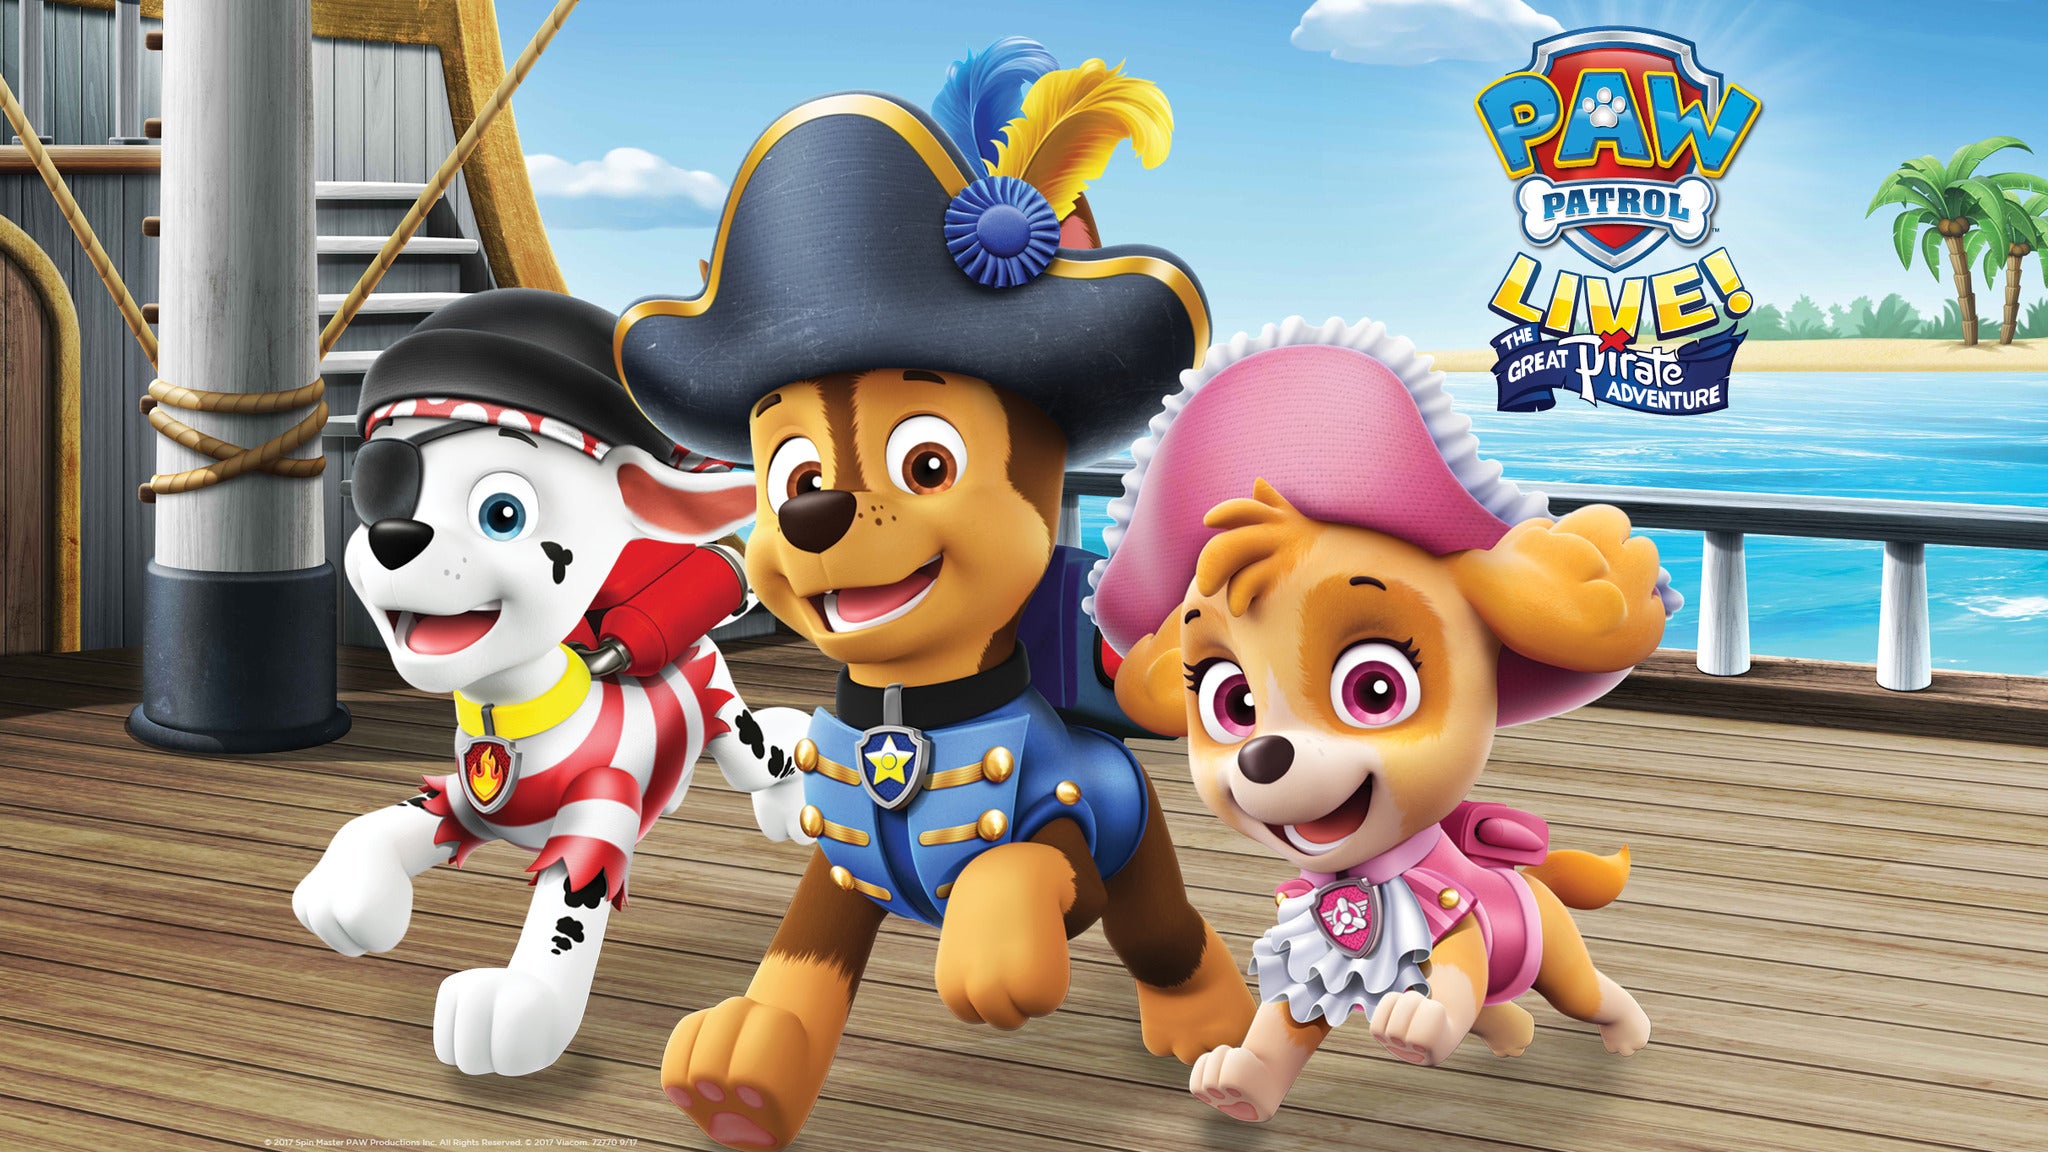 PAW Patrol Live! The Great Pirate Adventure in Bloomington promo photo for Citi® Cardmember presale offer code